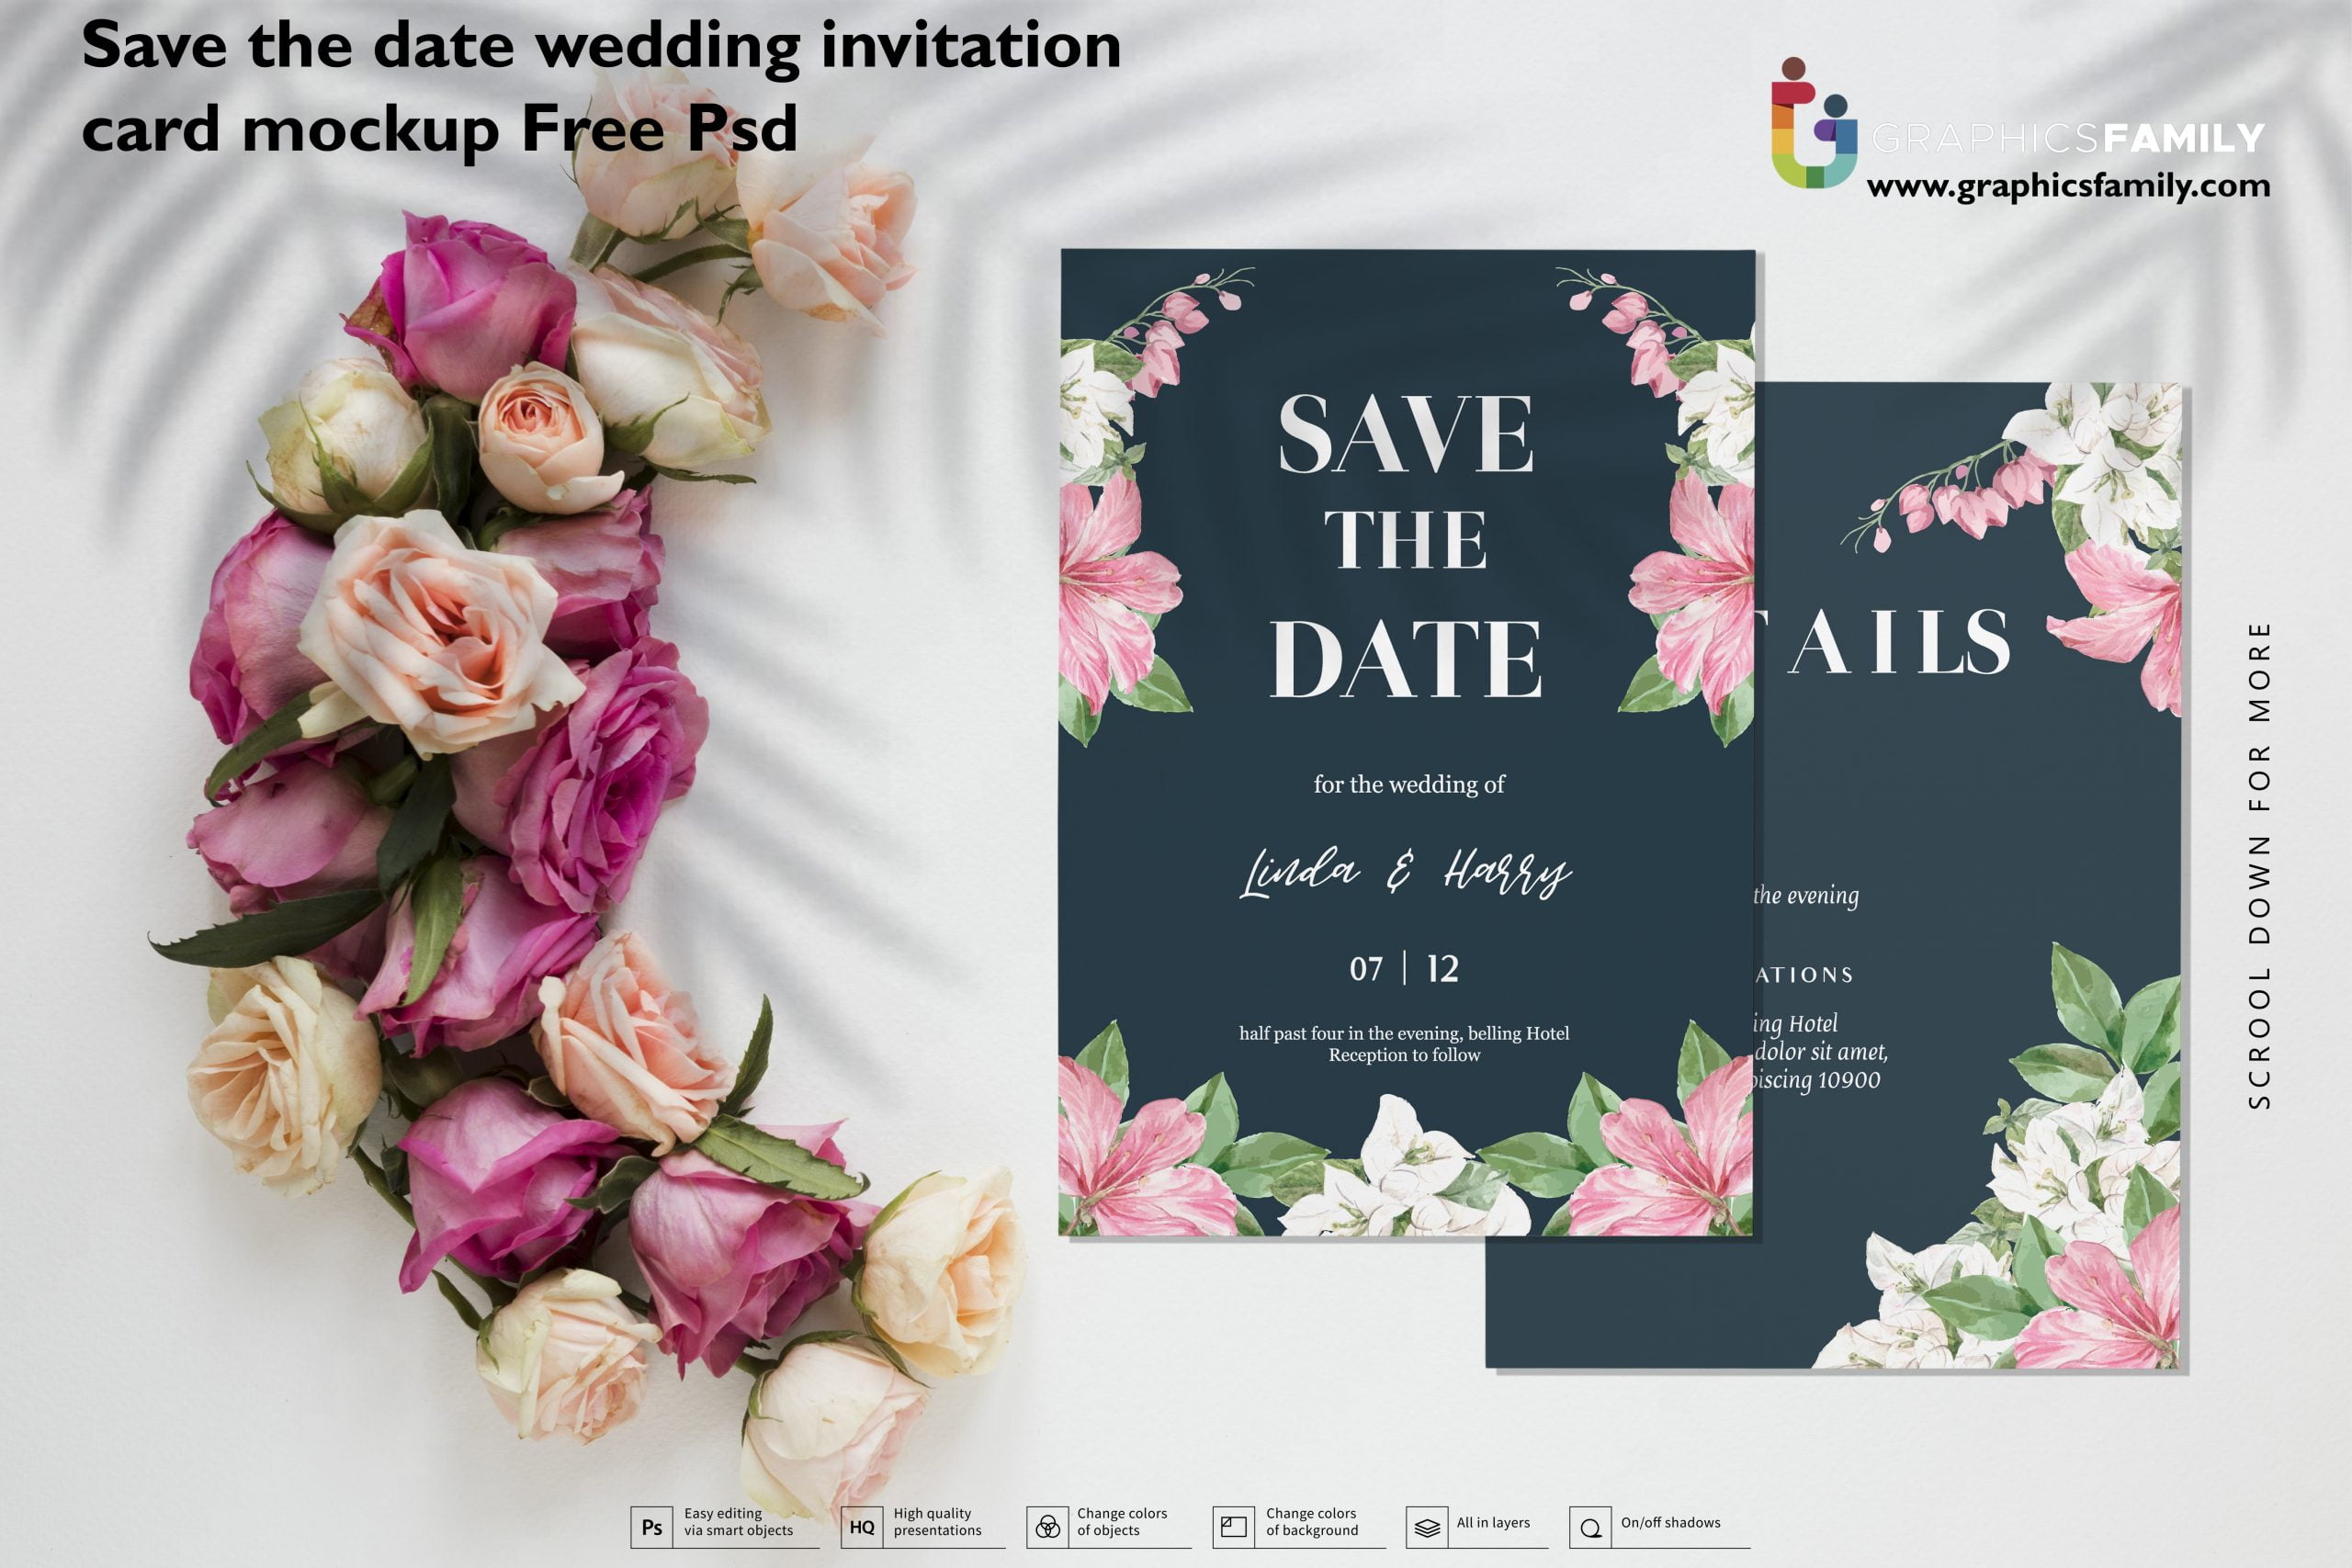 Free Wedding Invitations Download: .PSD, .AI, .EPS - GraphicsFamily